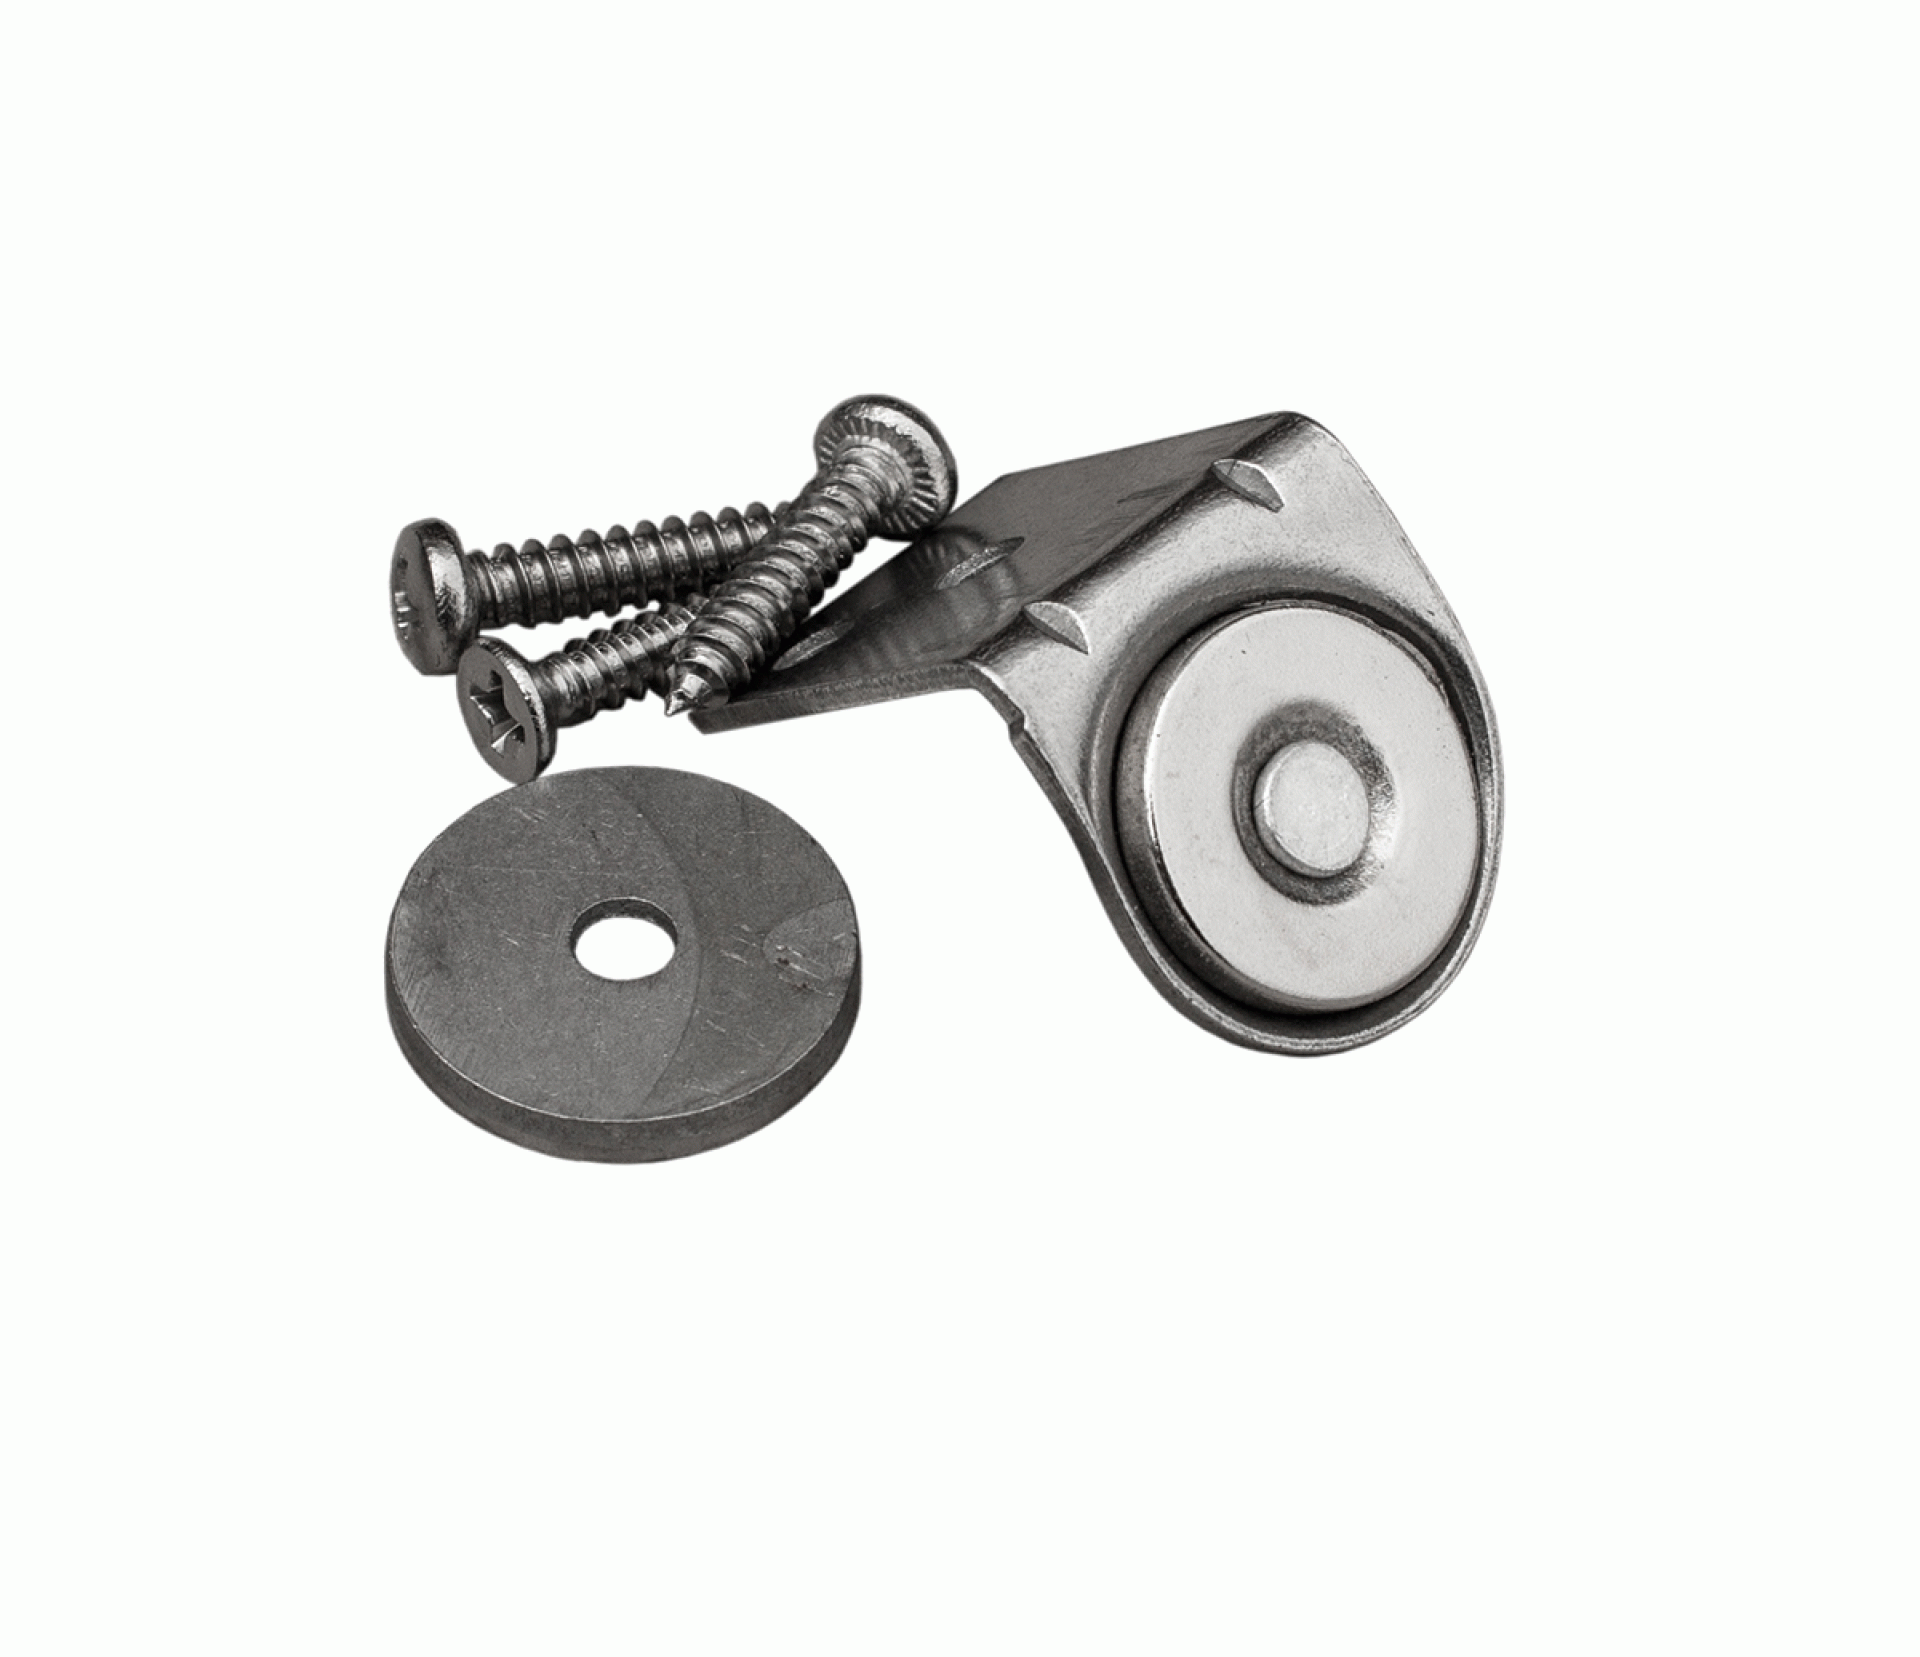 LEISURE PRODUCTS CANADA | PM2001M20LBS | MAGNETIC LATCH ANGLE BRACKET 3/4" DIAMETER 20 LB PULL FORCE